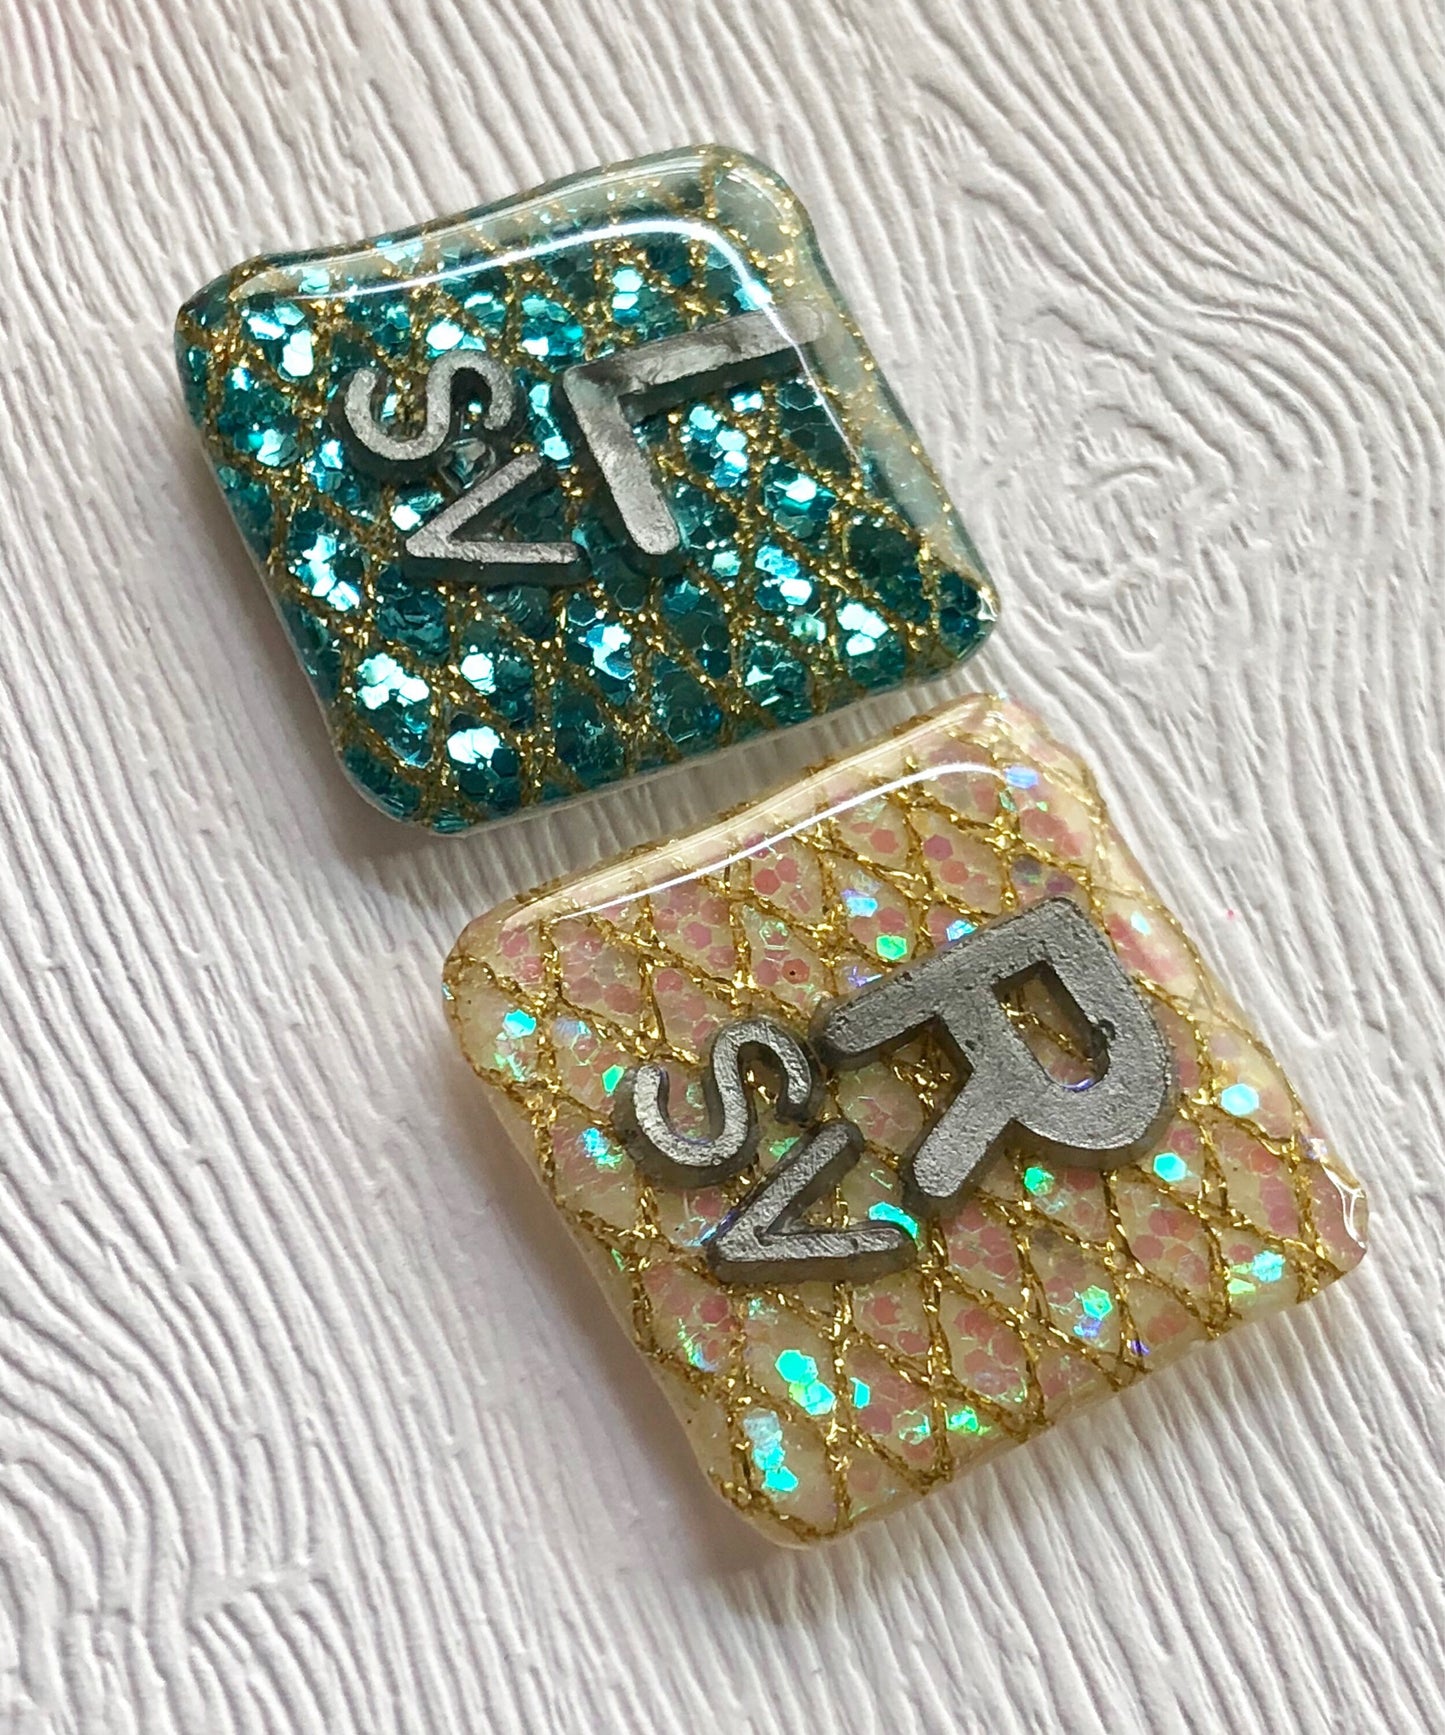 Fancy Square Xray Markers Customized w/ Initals Teal/Tan